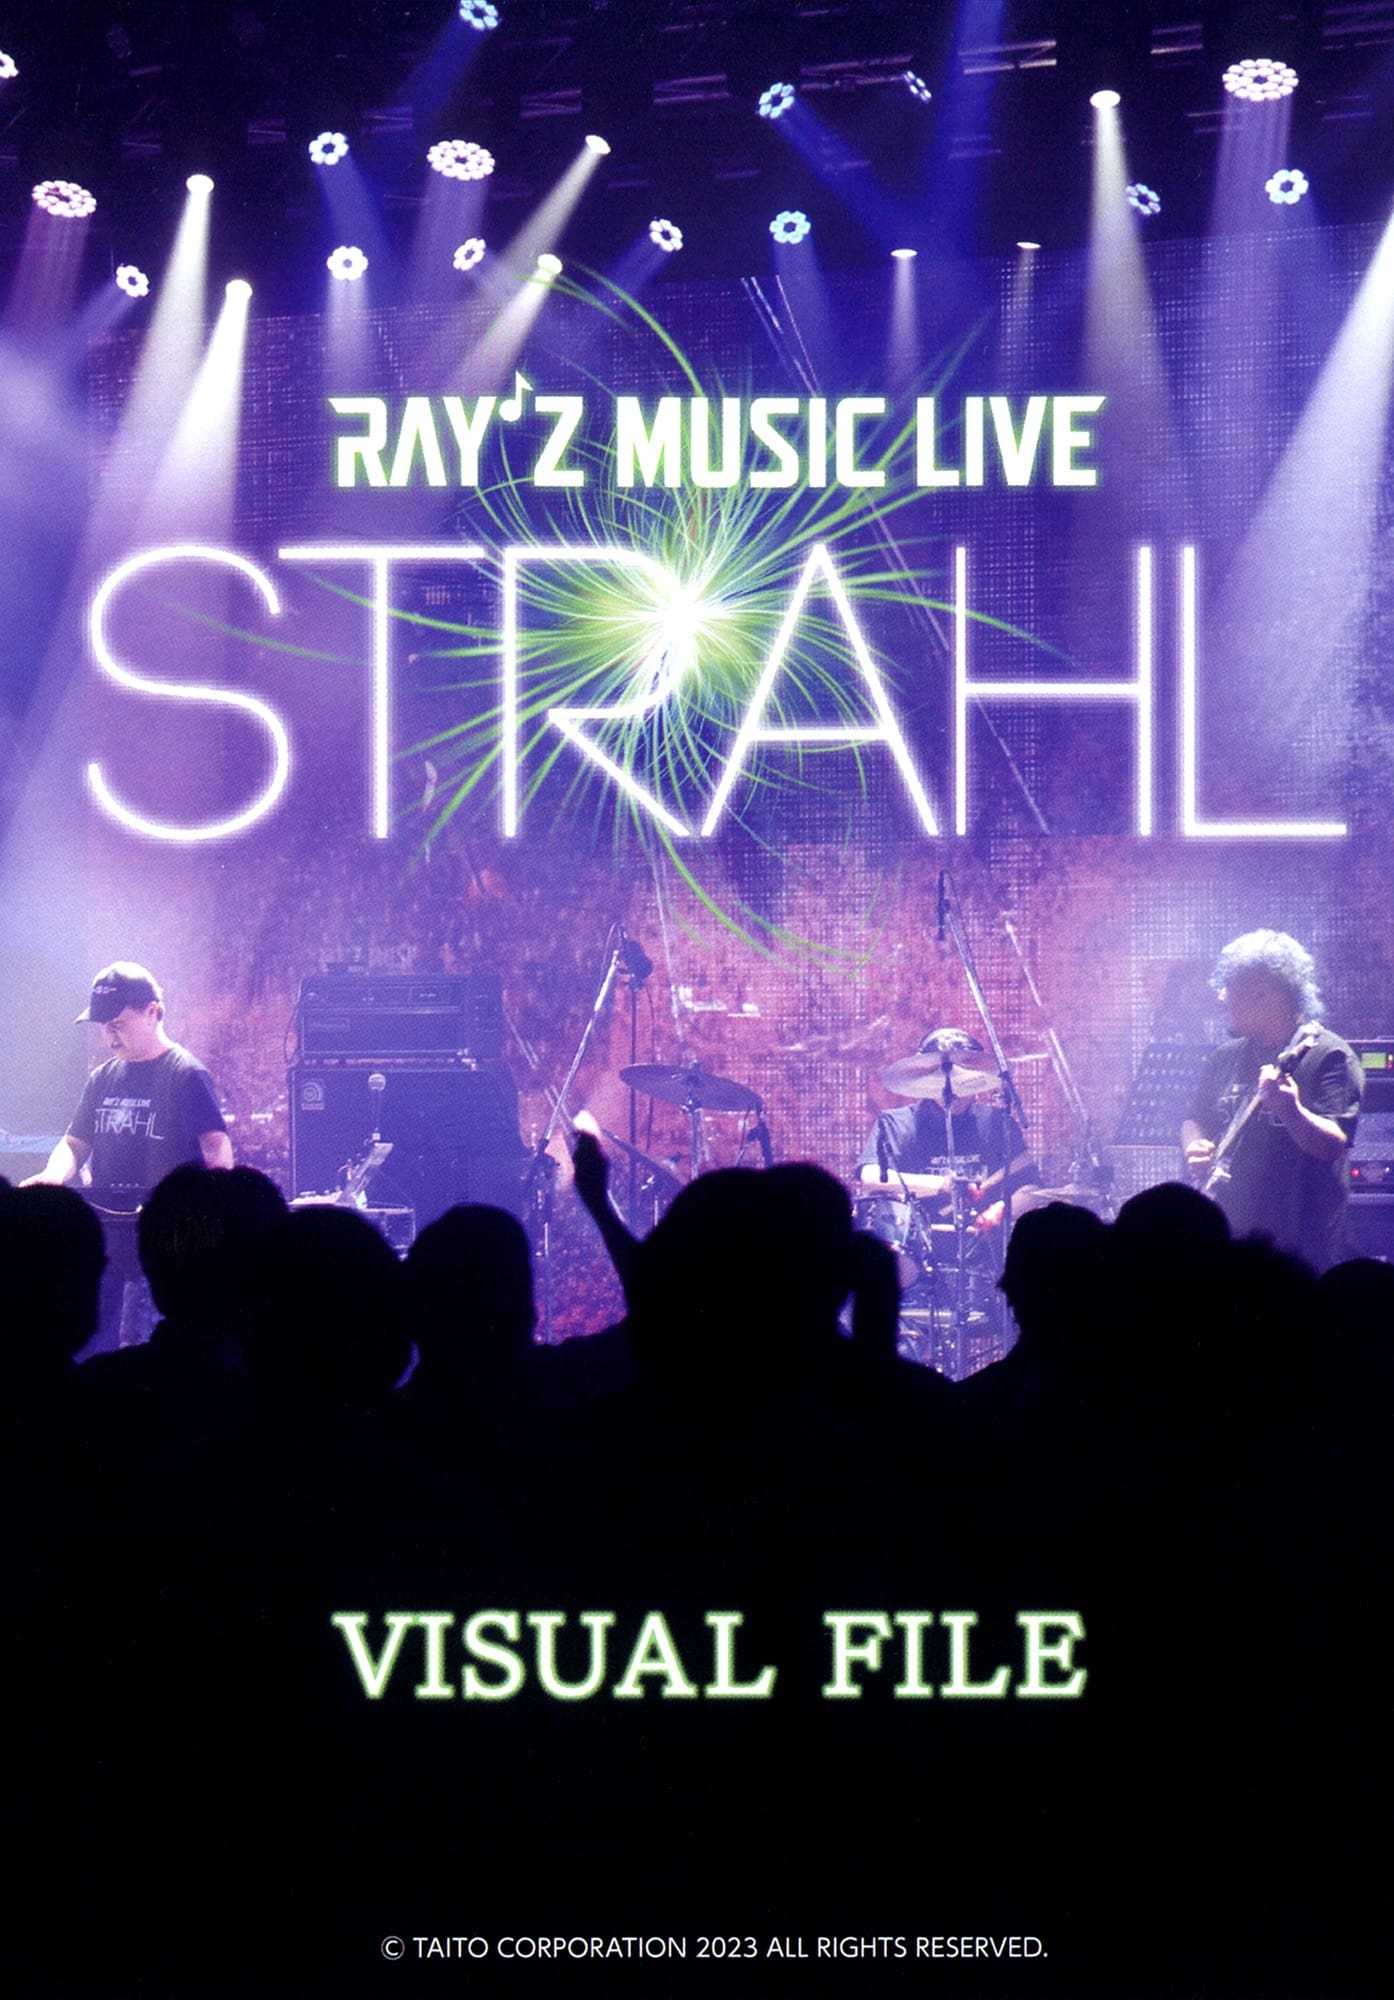 RAY'Z Music Live ~STRAHL~